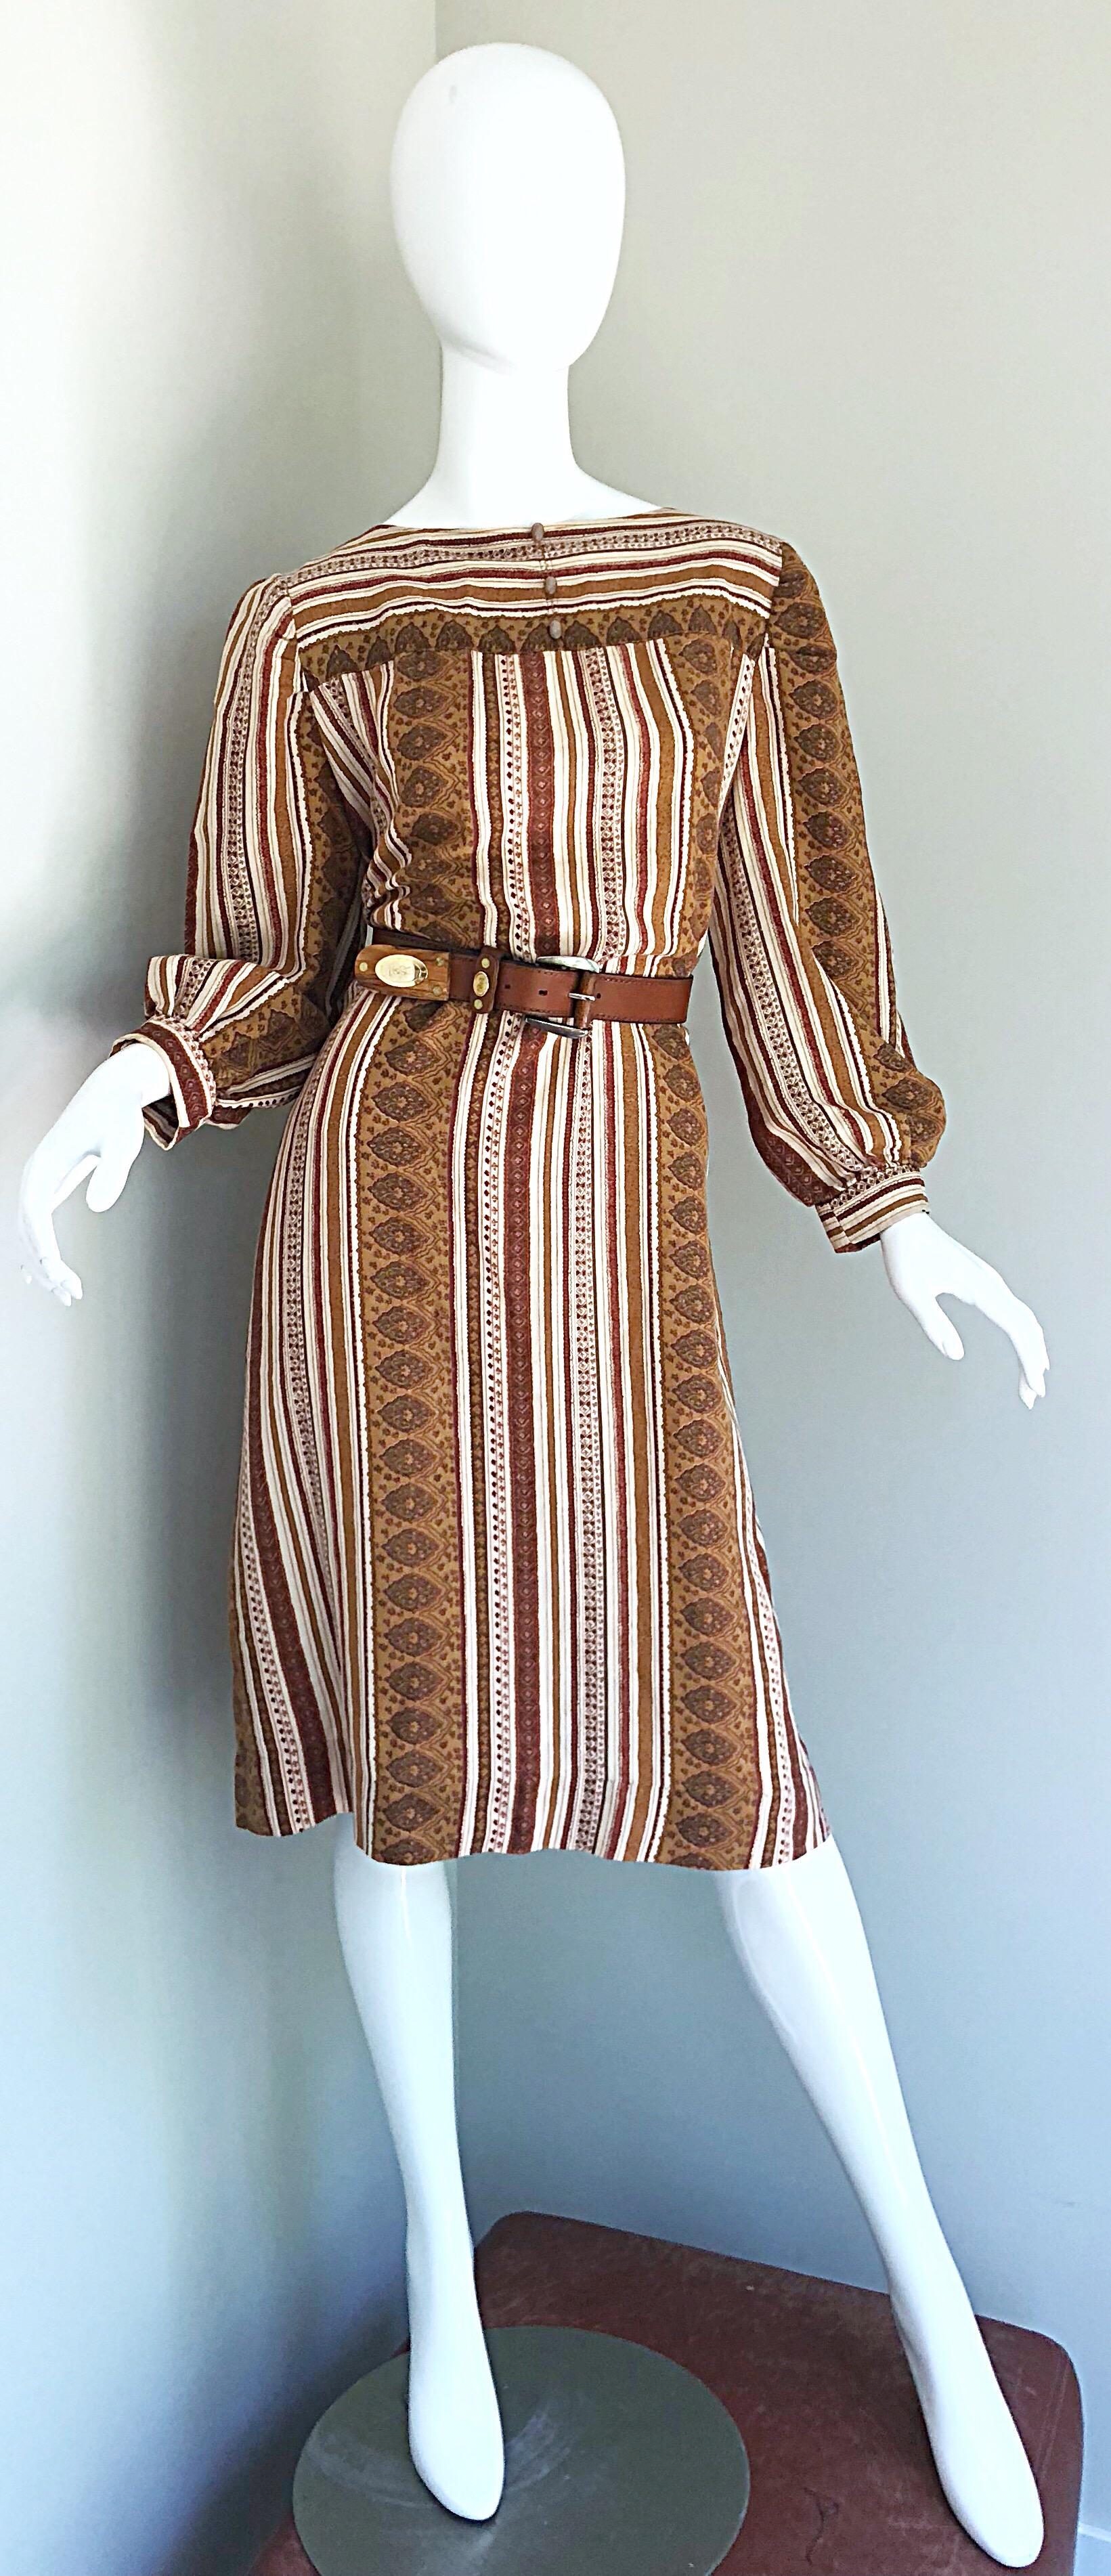 1970s Boho Chic Brown and Ivory Soft Cotton Paisley Print Vintage 70s Dress 5